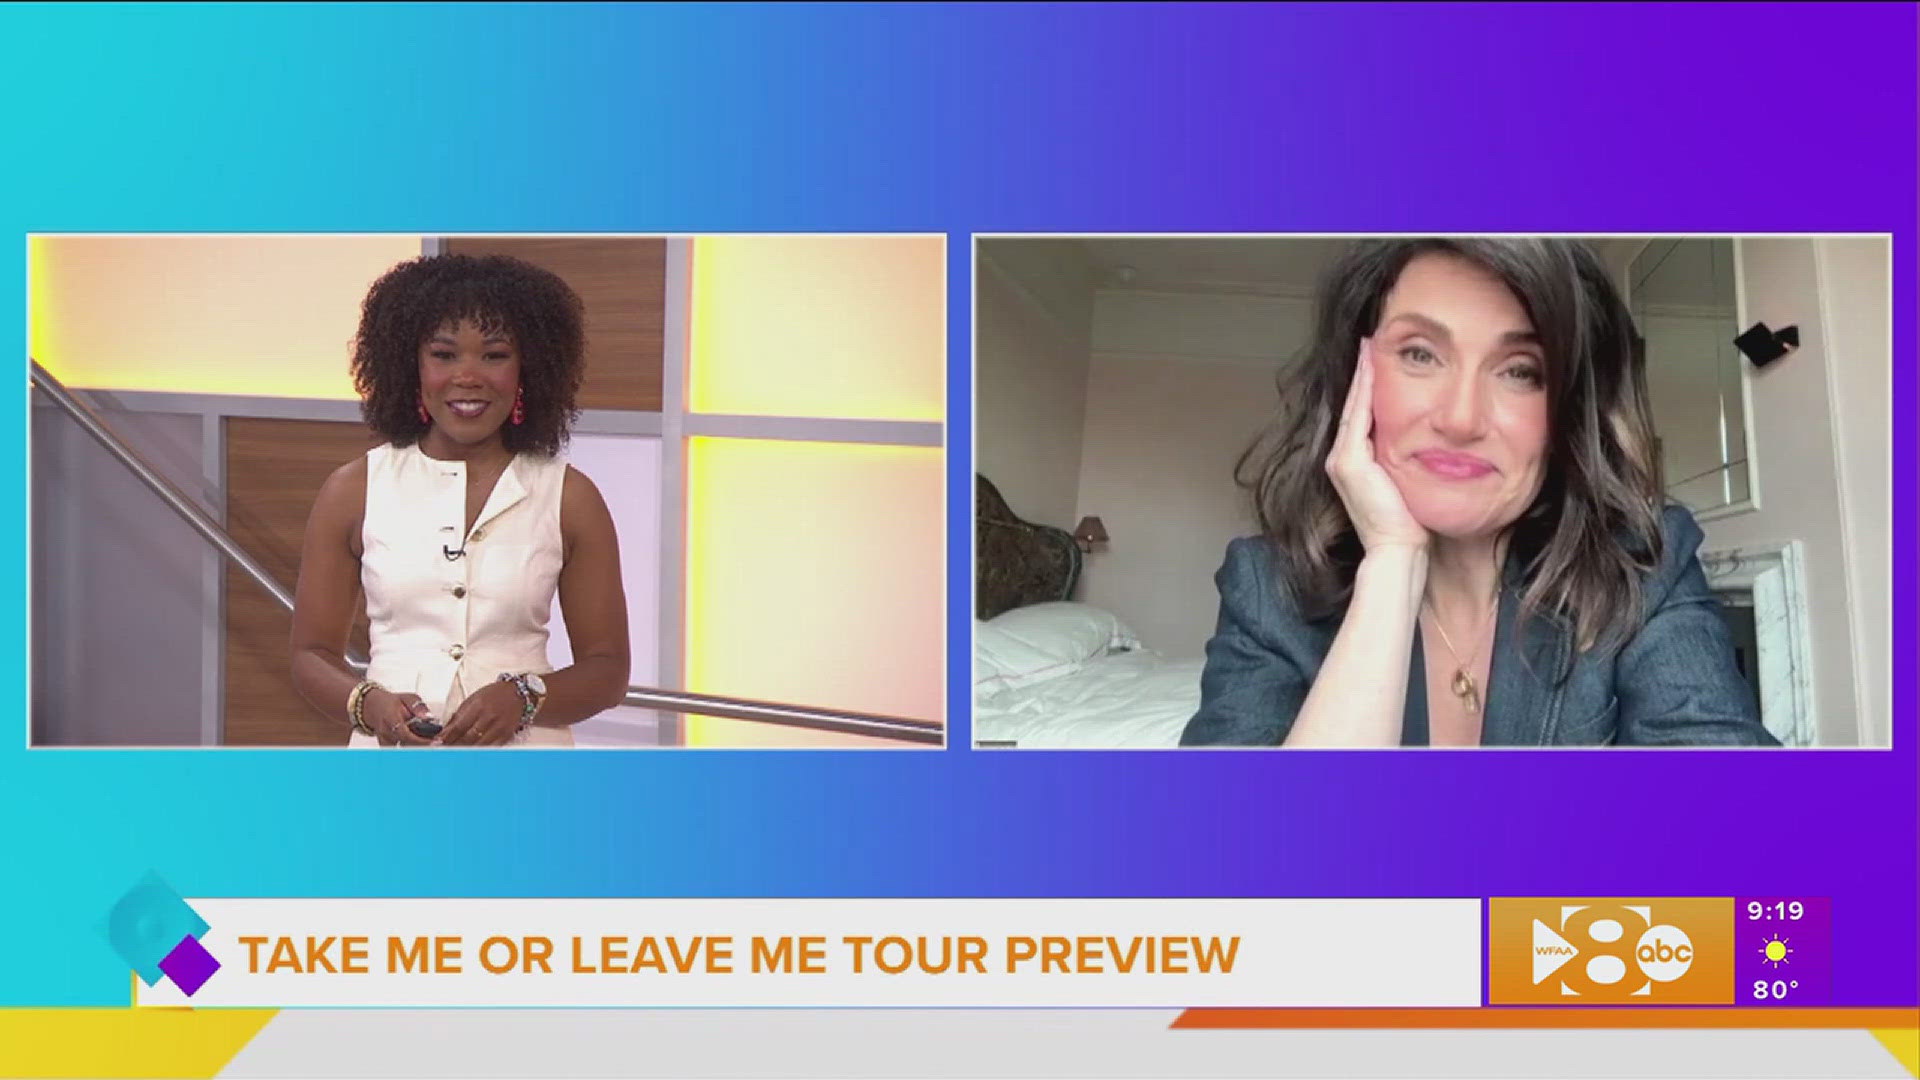 Tony Award winner, singer, songwriter and actress  Indina Menzel previews her "Take Me or Leave Me" tour coming to Dallas' Majestic Theatre July 31.